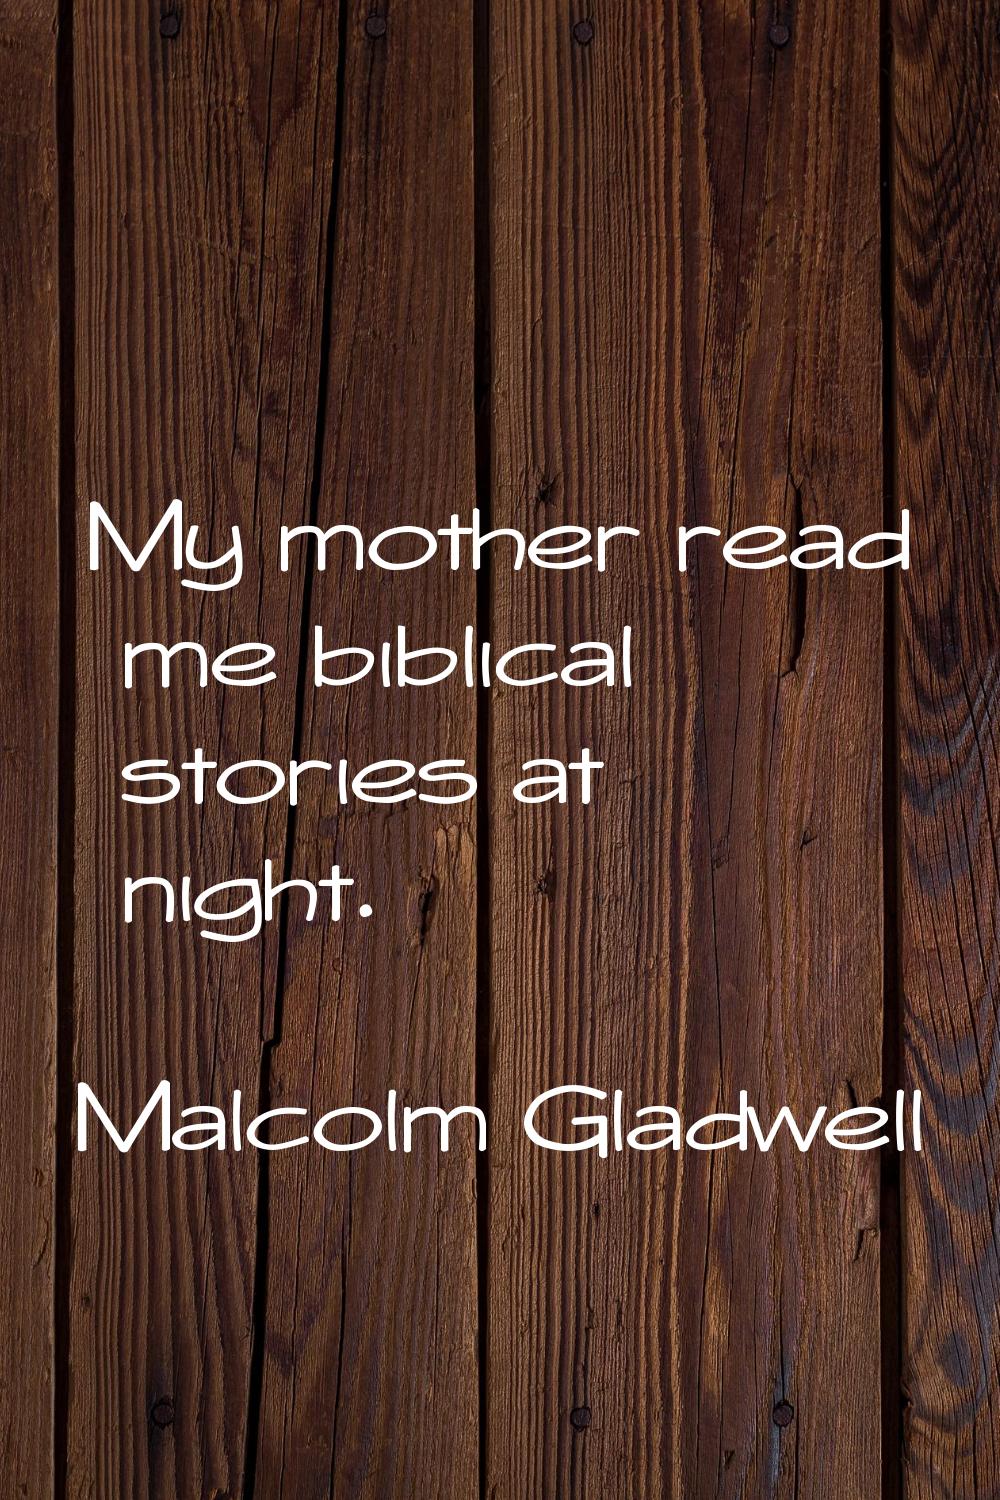 My mother read me biblical stories at night.